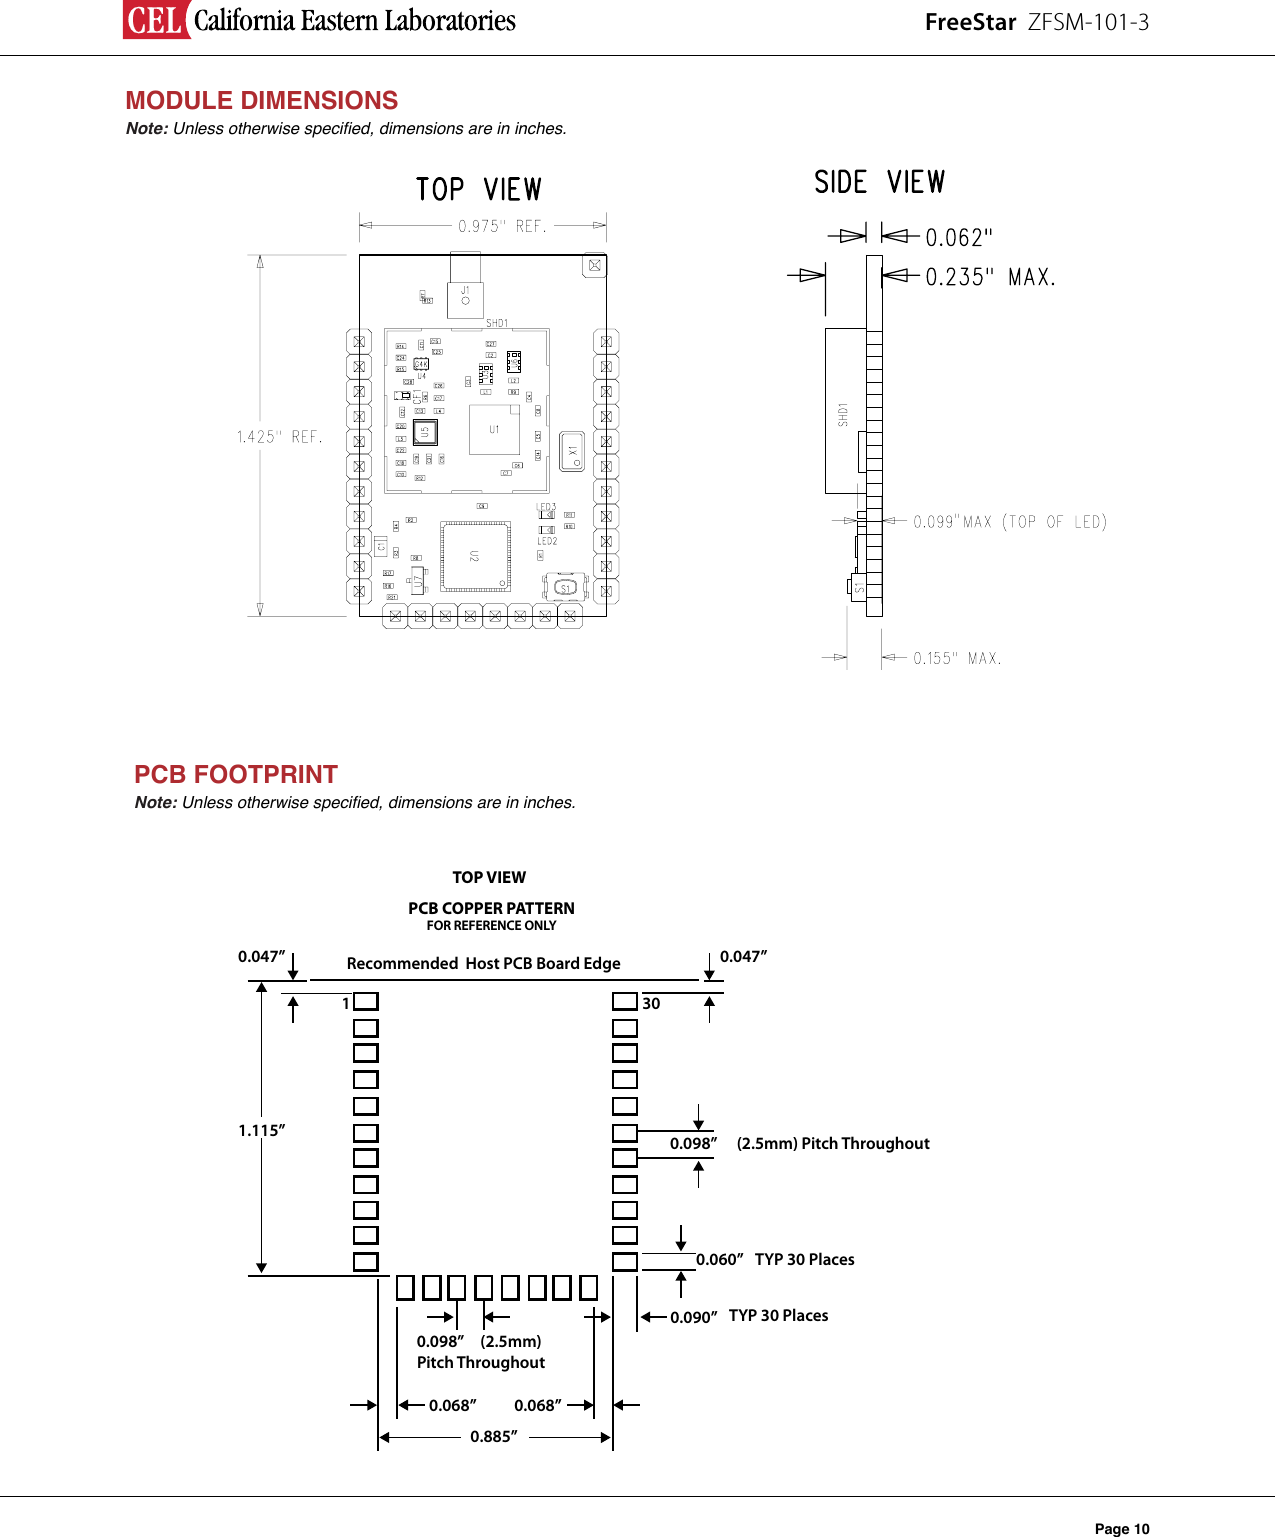 FreeStar  ZFSM-101-3Page 10MODULE DIMENSIONSNote: Unless otherwise specied, dimensions are in inches.11.115”0.098”0.060”0.090”0.098”0.068”0.885”0.068”(2.5mm) Pitch ThroughoutRecommended  Host PCB Board EdgePCB COPPER PATTERNFOR REFERENCE ONLYTOP VIEW(2.5mm) Pitch ThroughoutTYP 30 PlacesTYP 30 Places0.047”0.047”30PCB FOOTPRINTNote: Unless otherwise specied, dimensions are in inches.